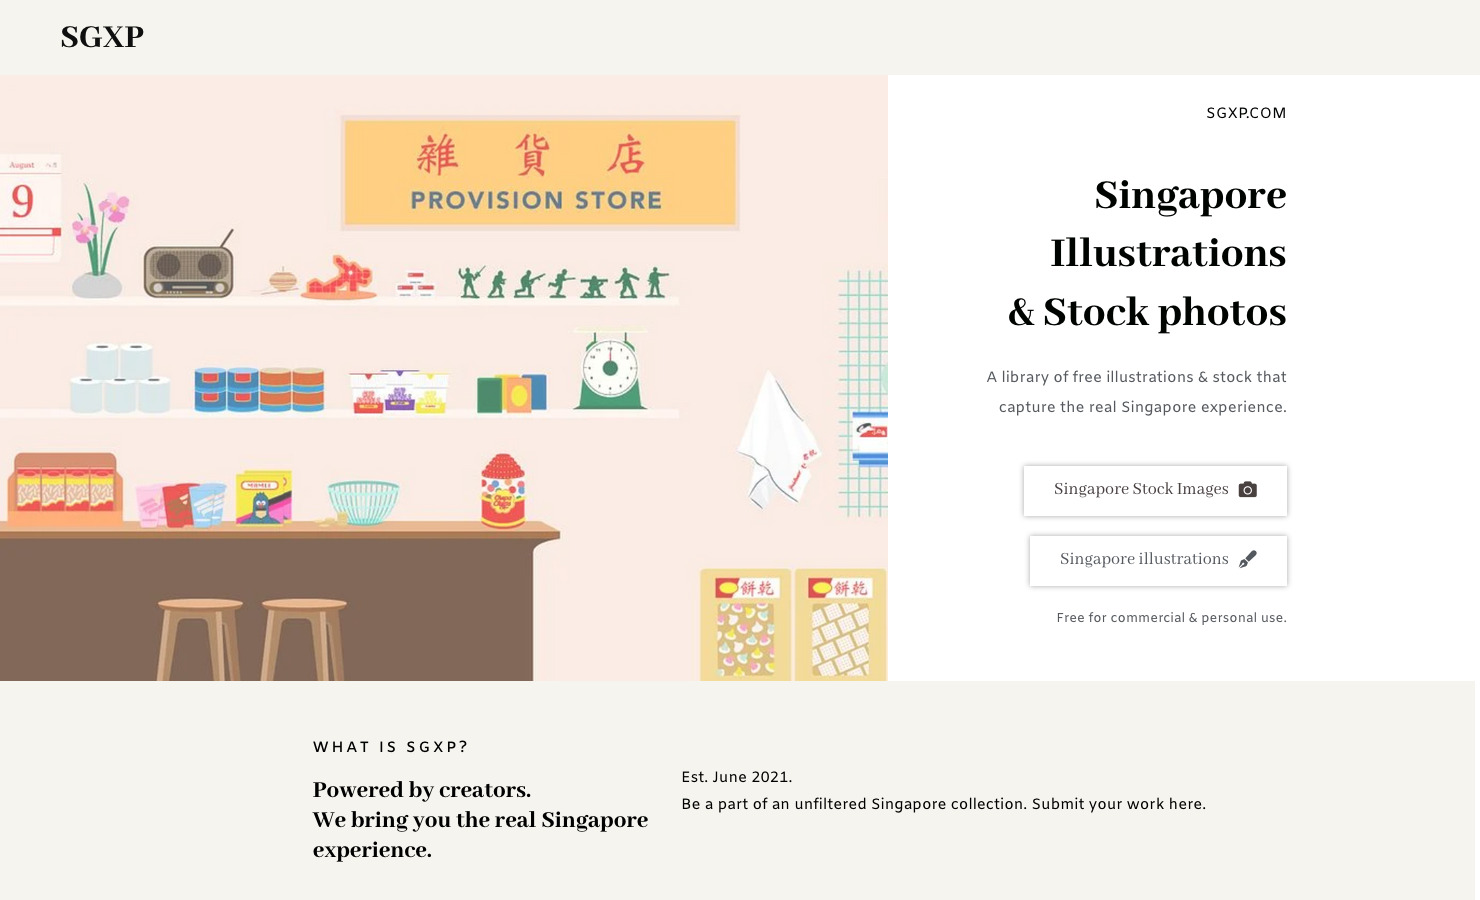 Singapore Stock Photos and Illustrations